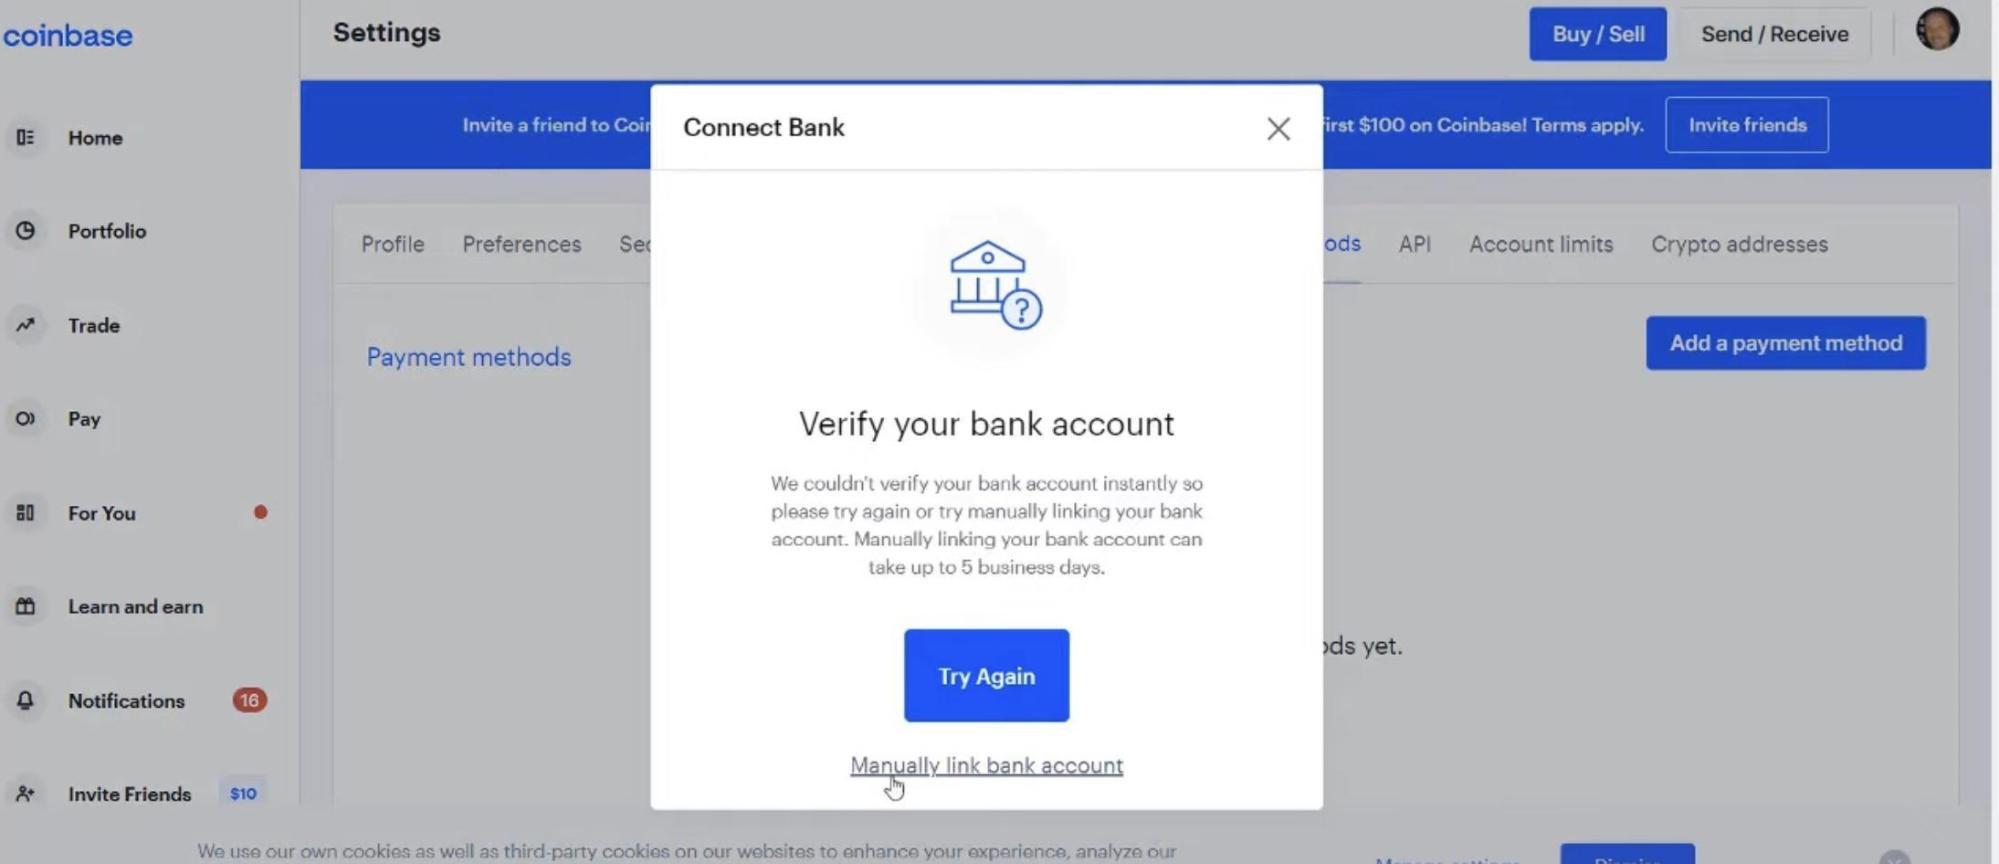 How to Deposit Money From Bank Account to Coinbase - Followchain